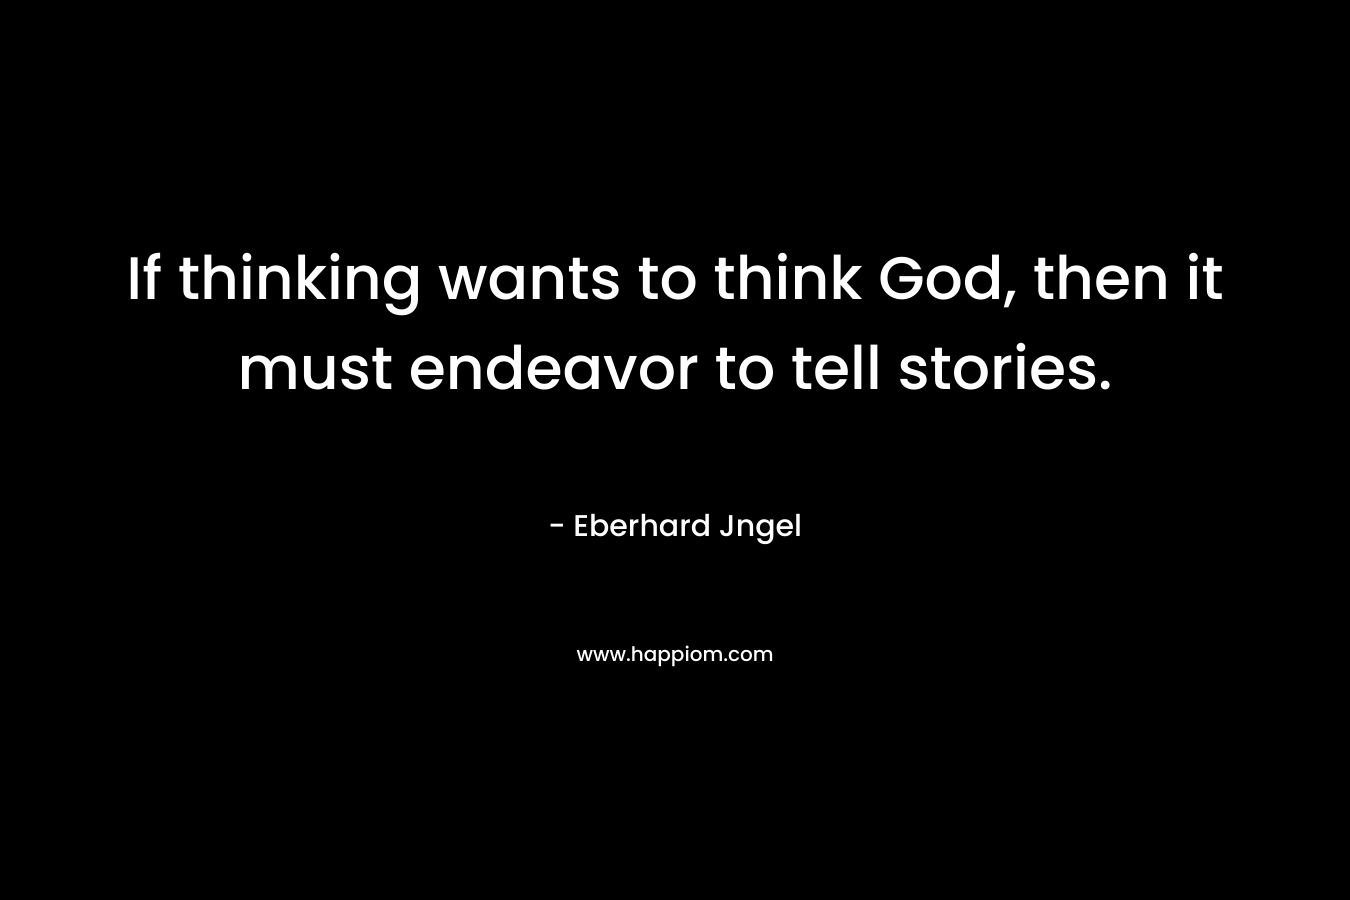 If thinking wants to think God, then it must endeavor to tell stories. – Eberhard Jngel